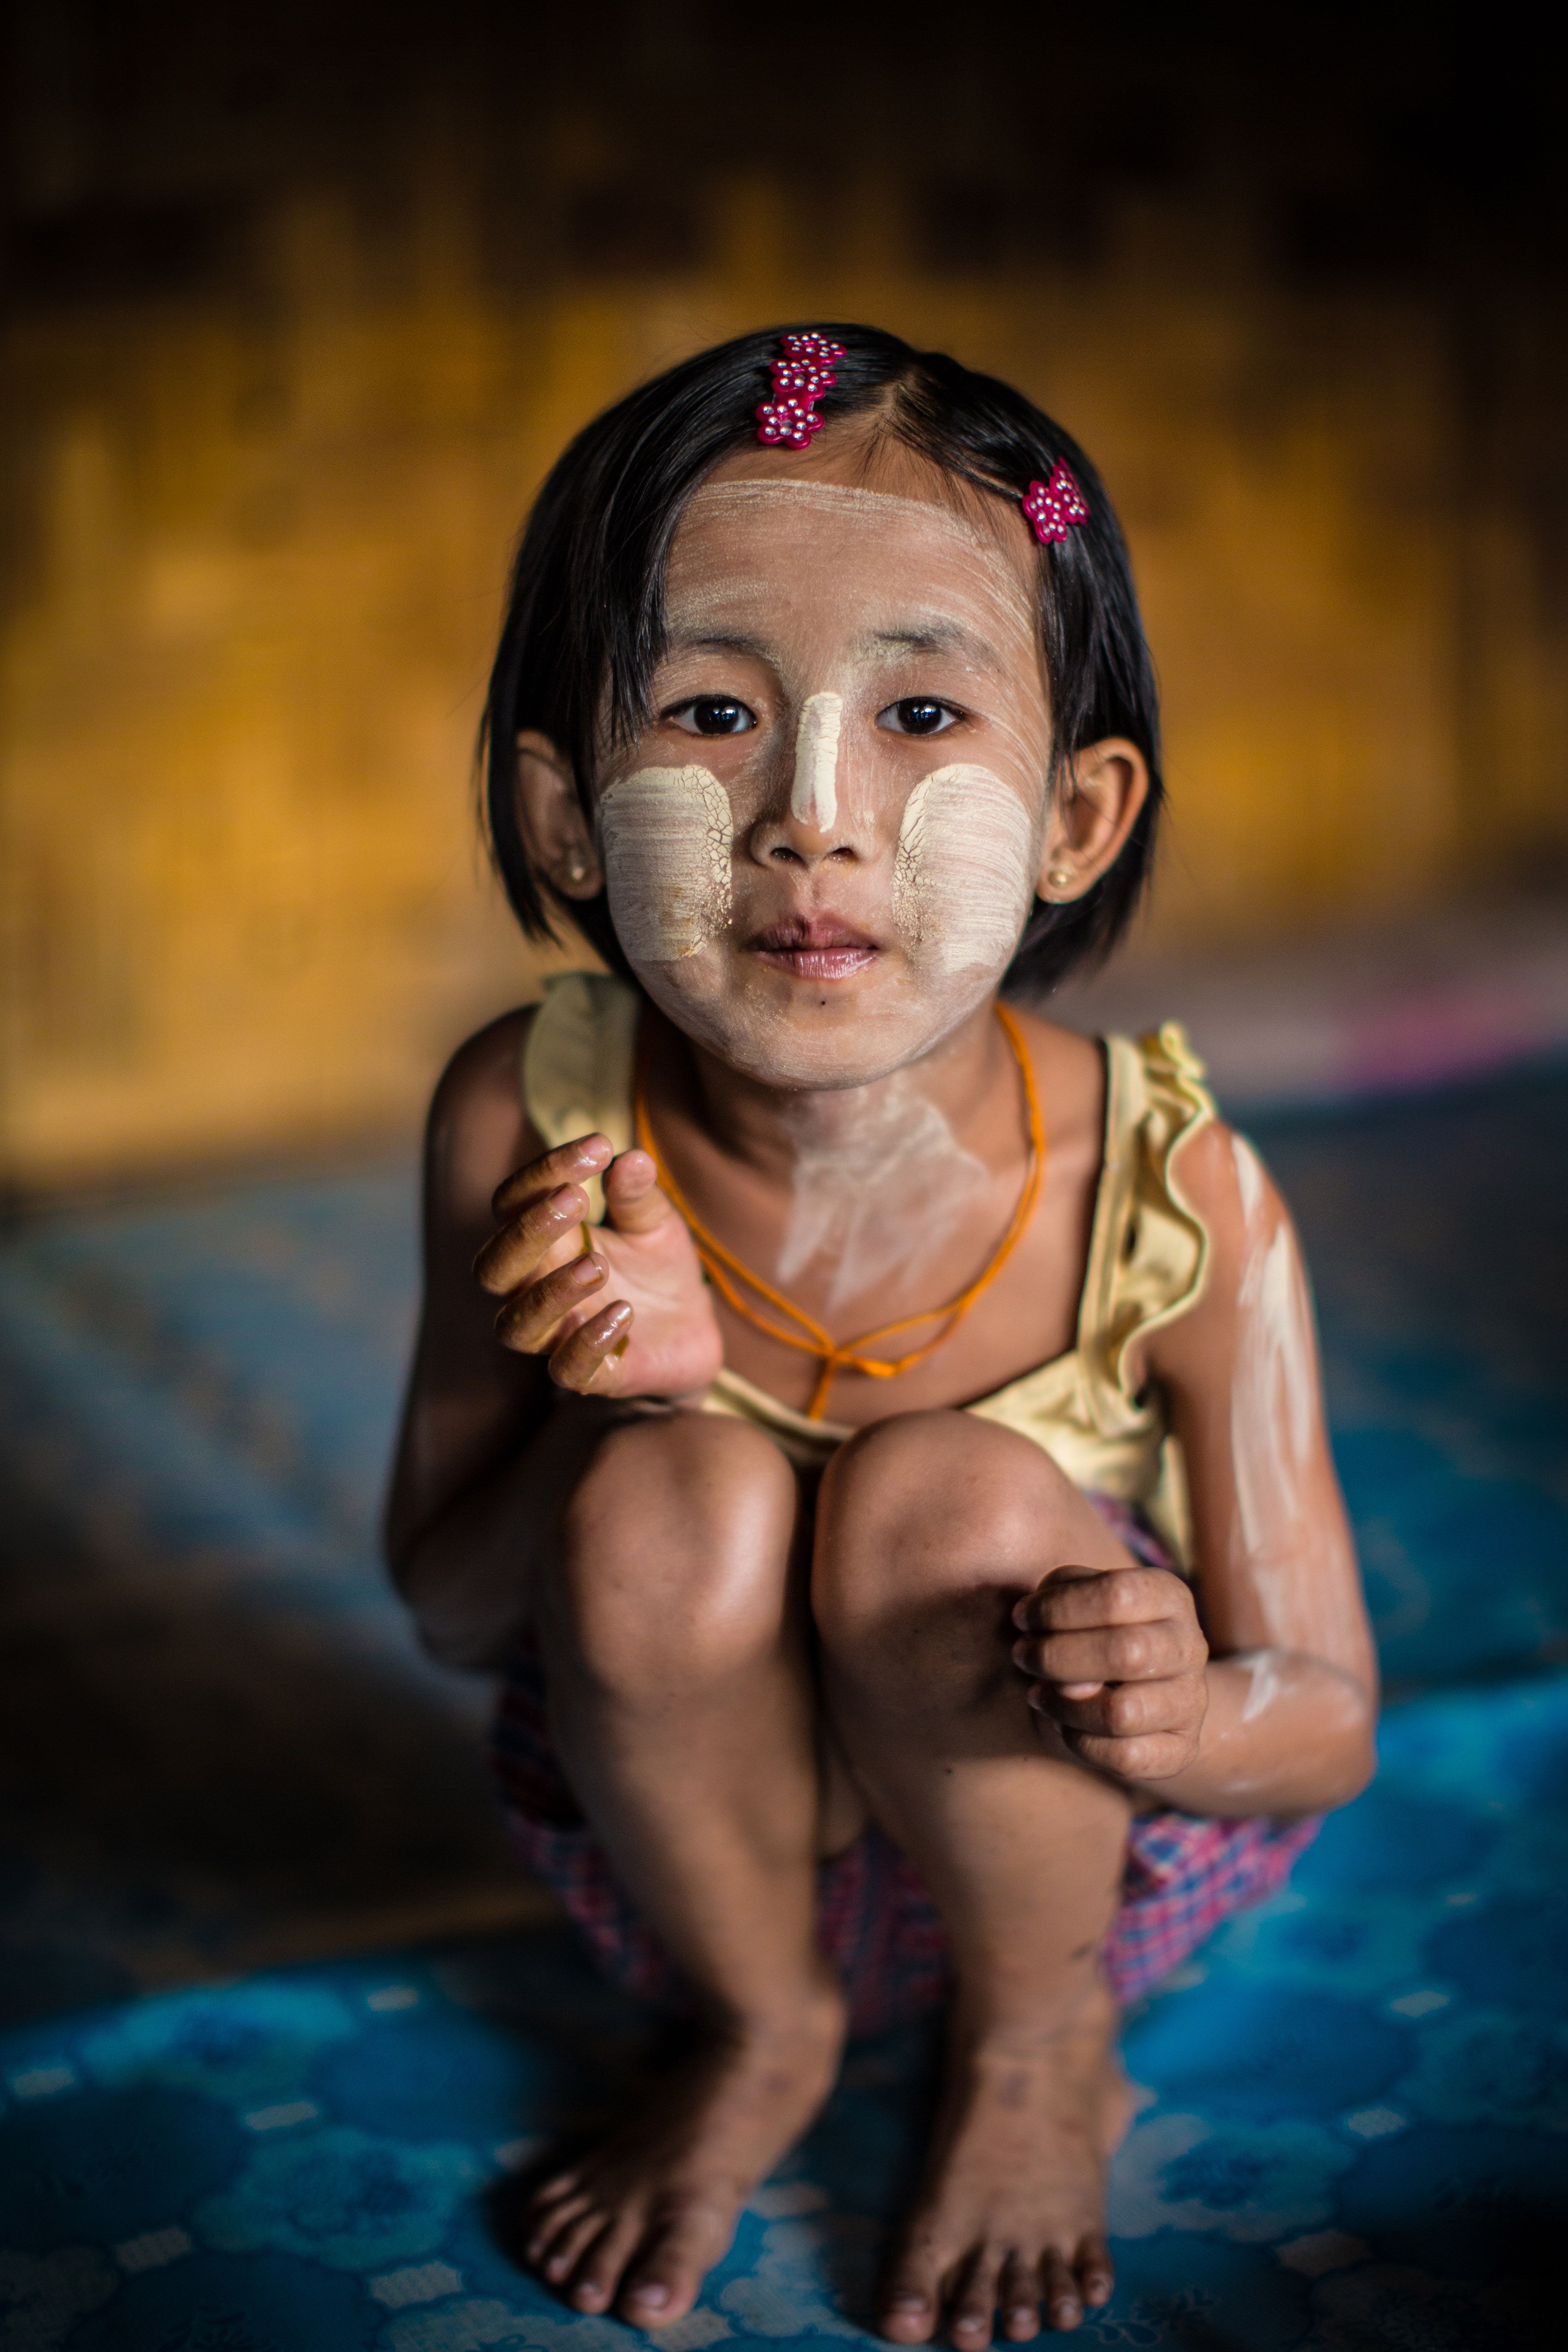 Simon Lister's UNICEF Photos of Young Girls From Around the World